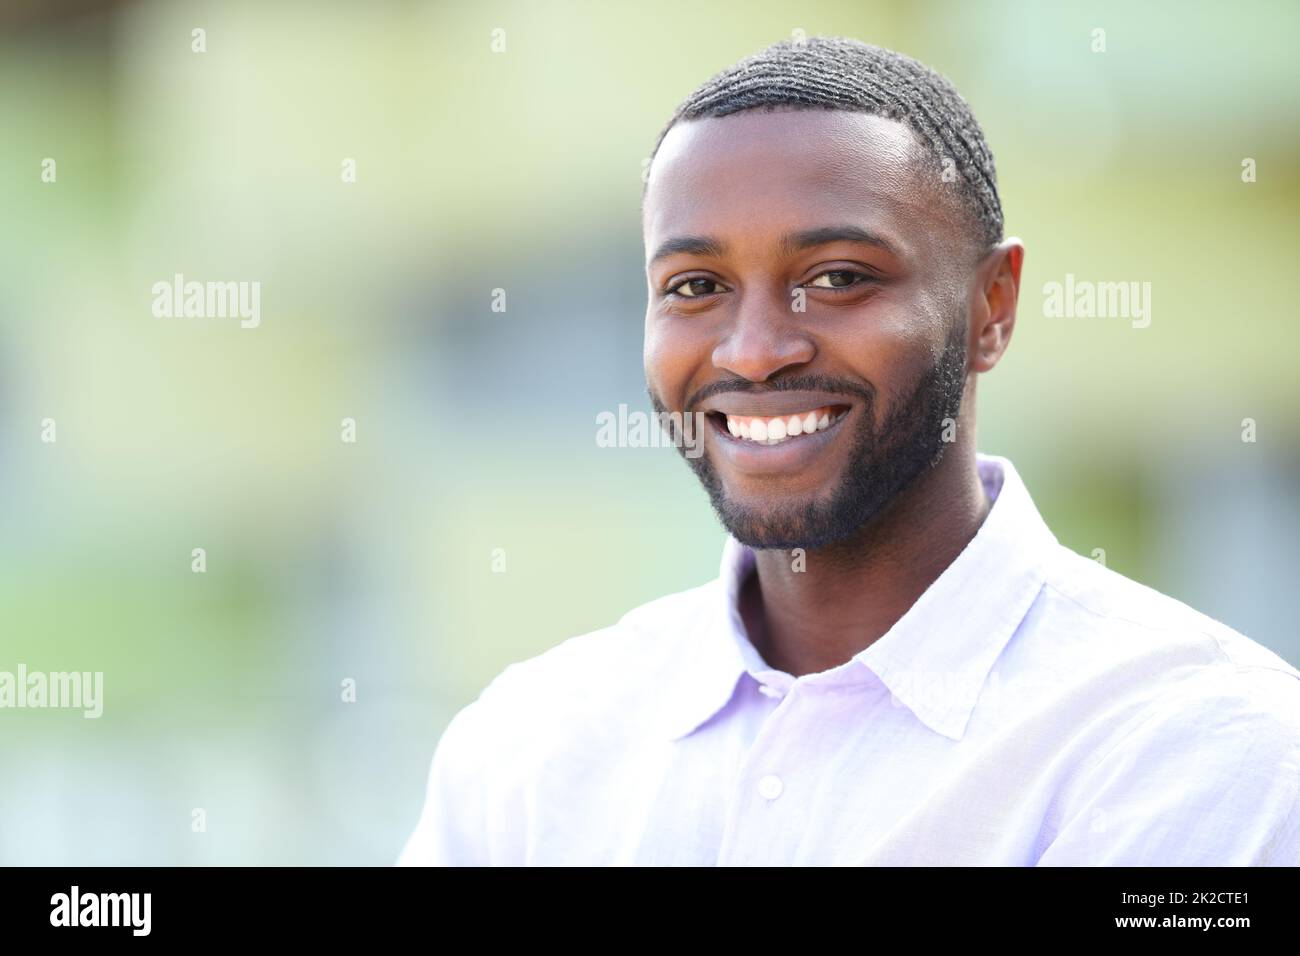 Handsome happy man with black skin looks at you Stock Photo